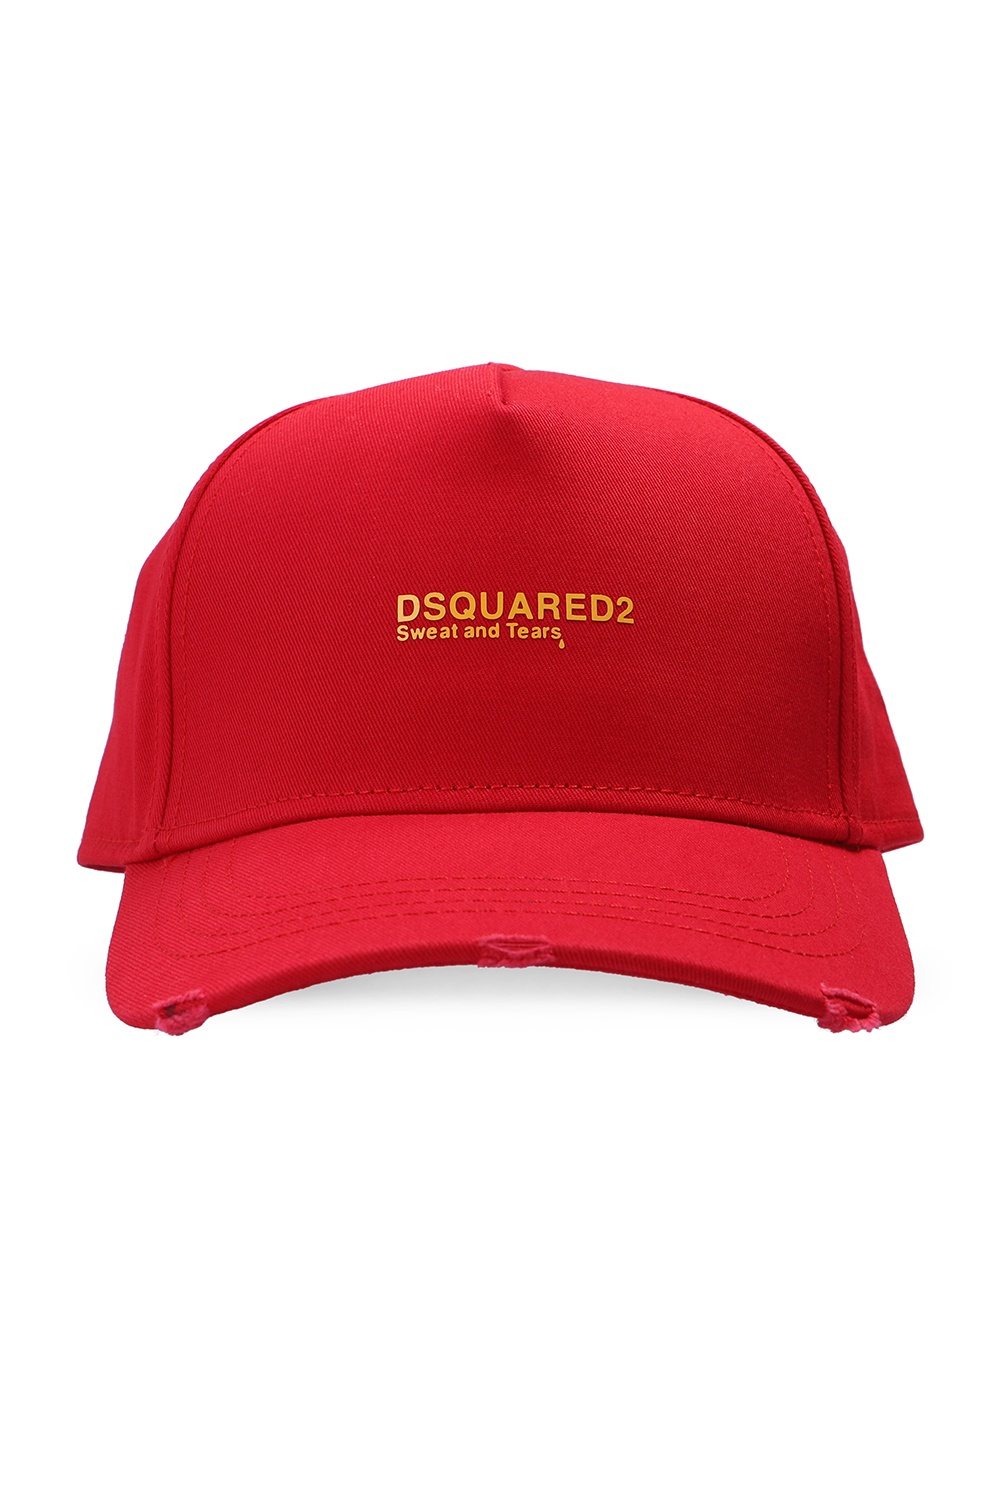 Dsquared2 Tipoff Chuck Taylor Patch Baseball Cap 10008474-A01